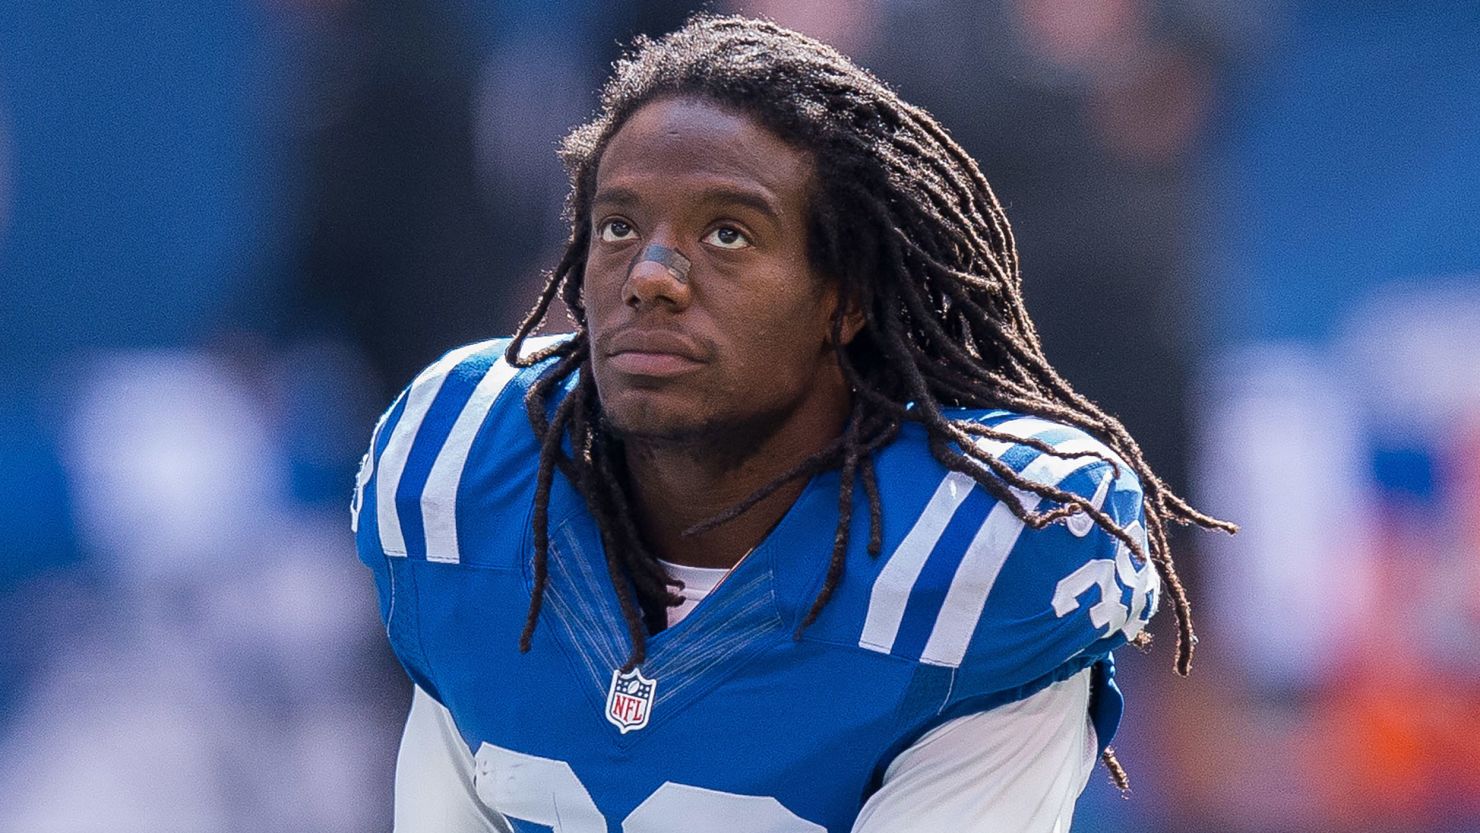 Former NFL player Sergio Brown was taken into custody, a source said.